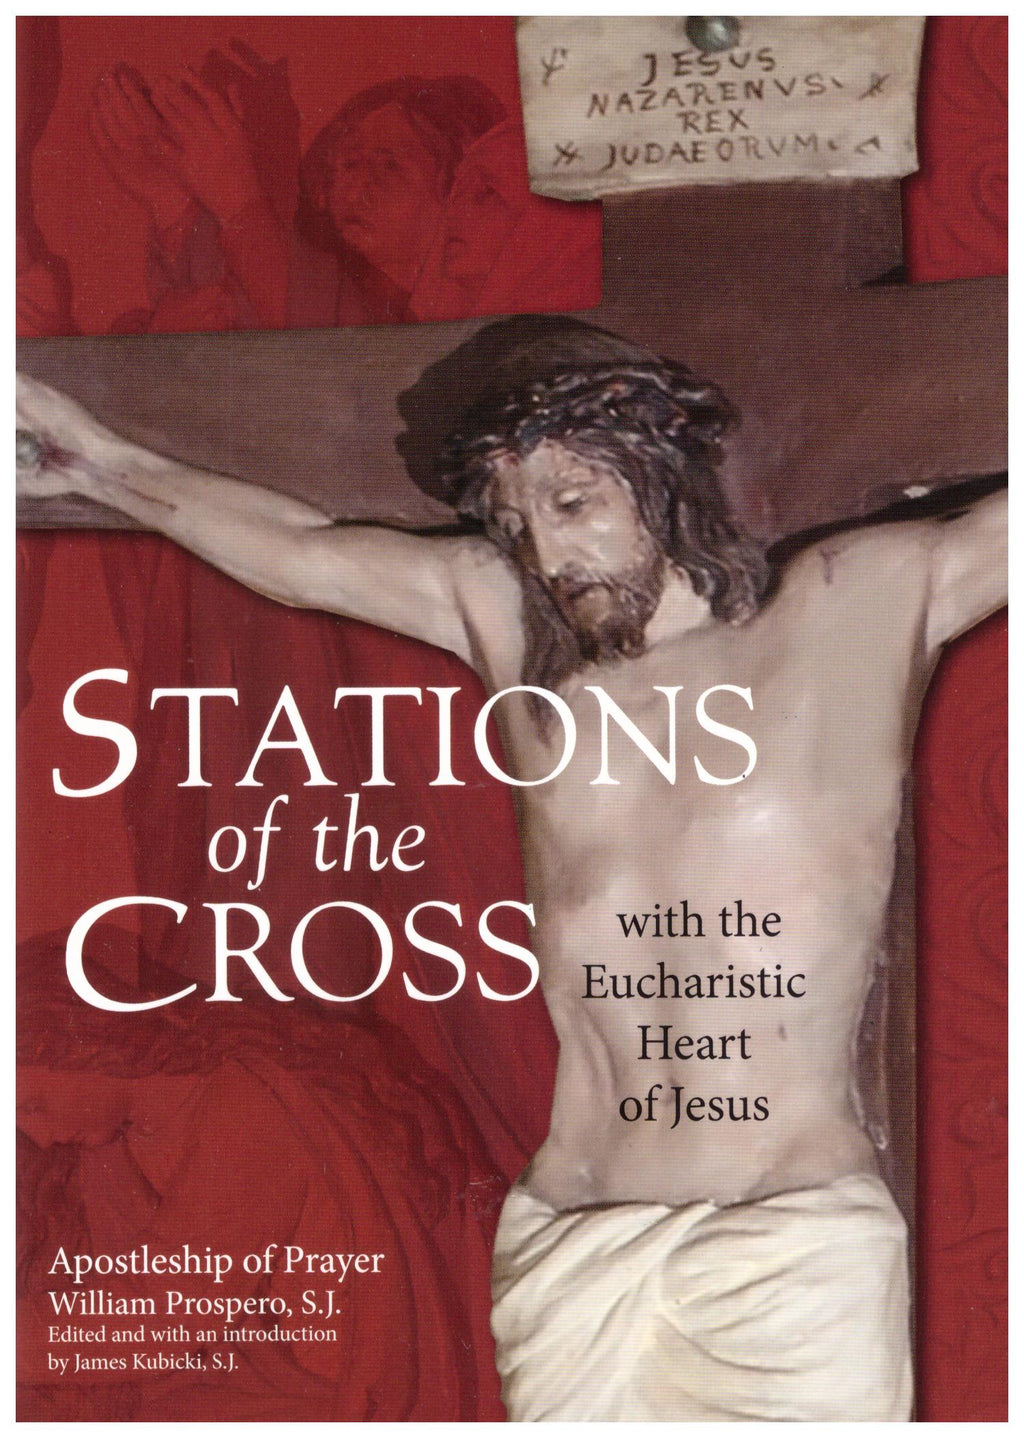 Stations of the Cross with the Eucharistic Heart of Jesus book cover. 